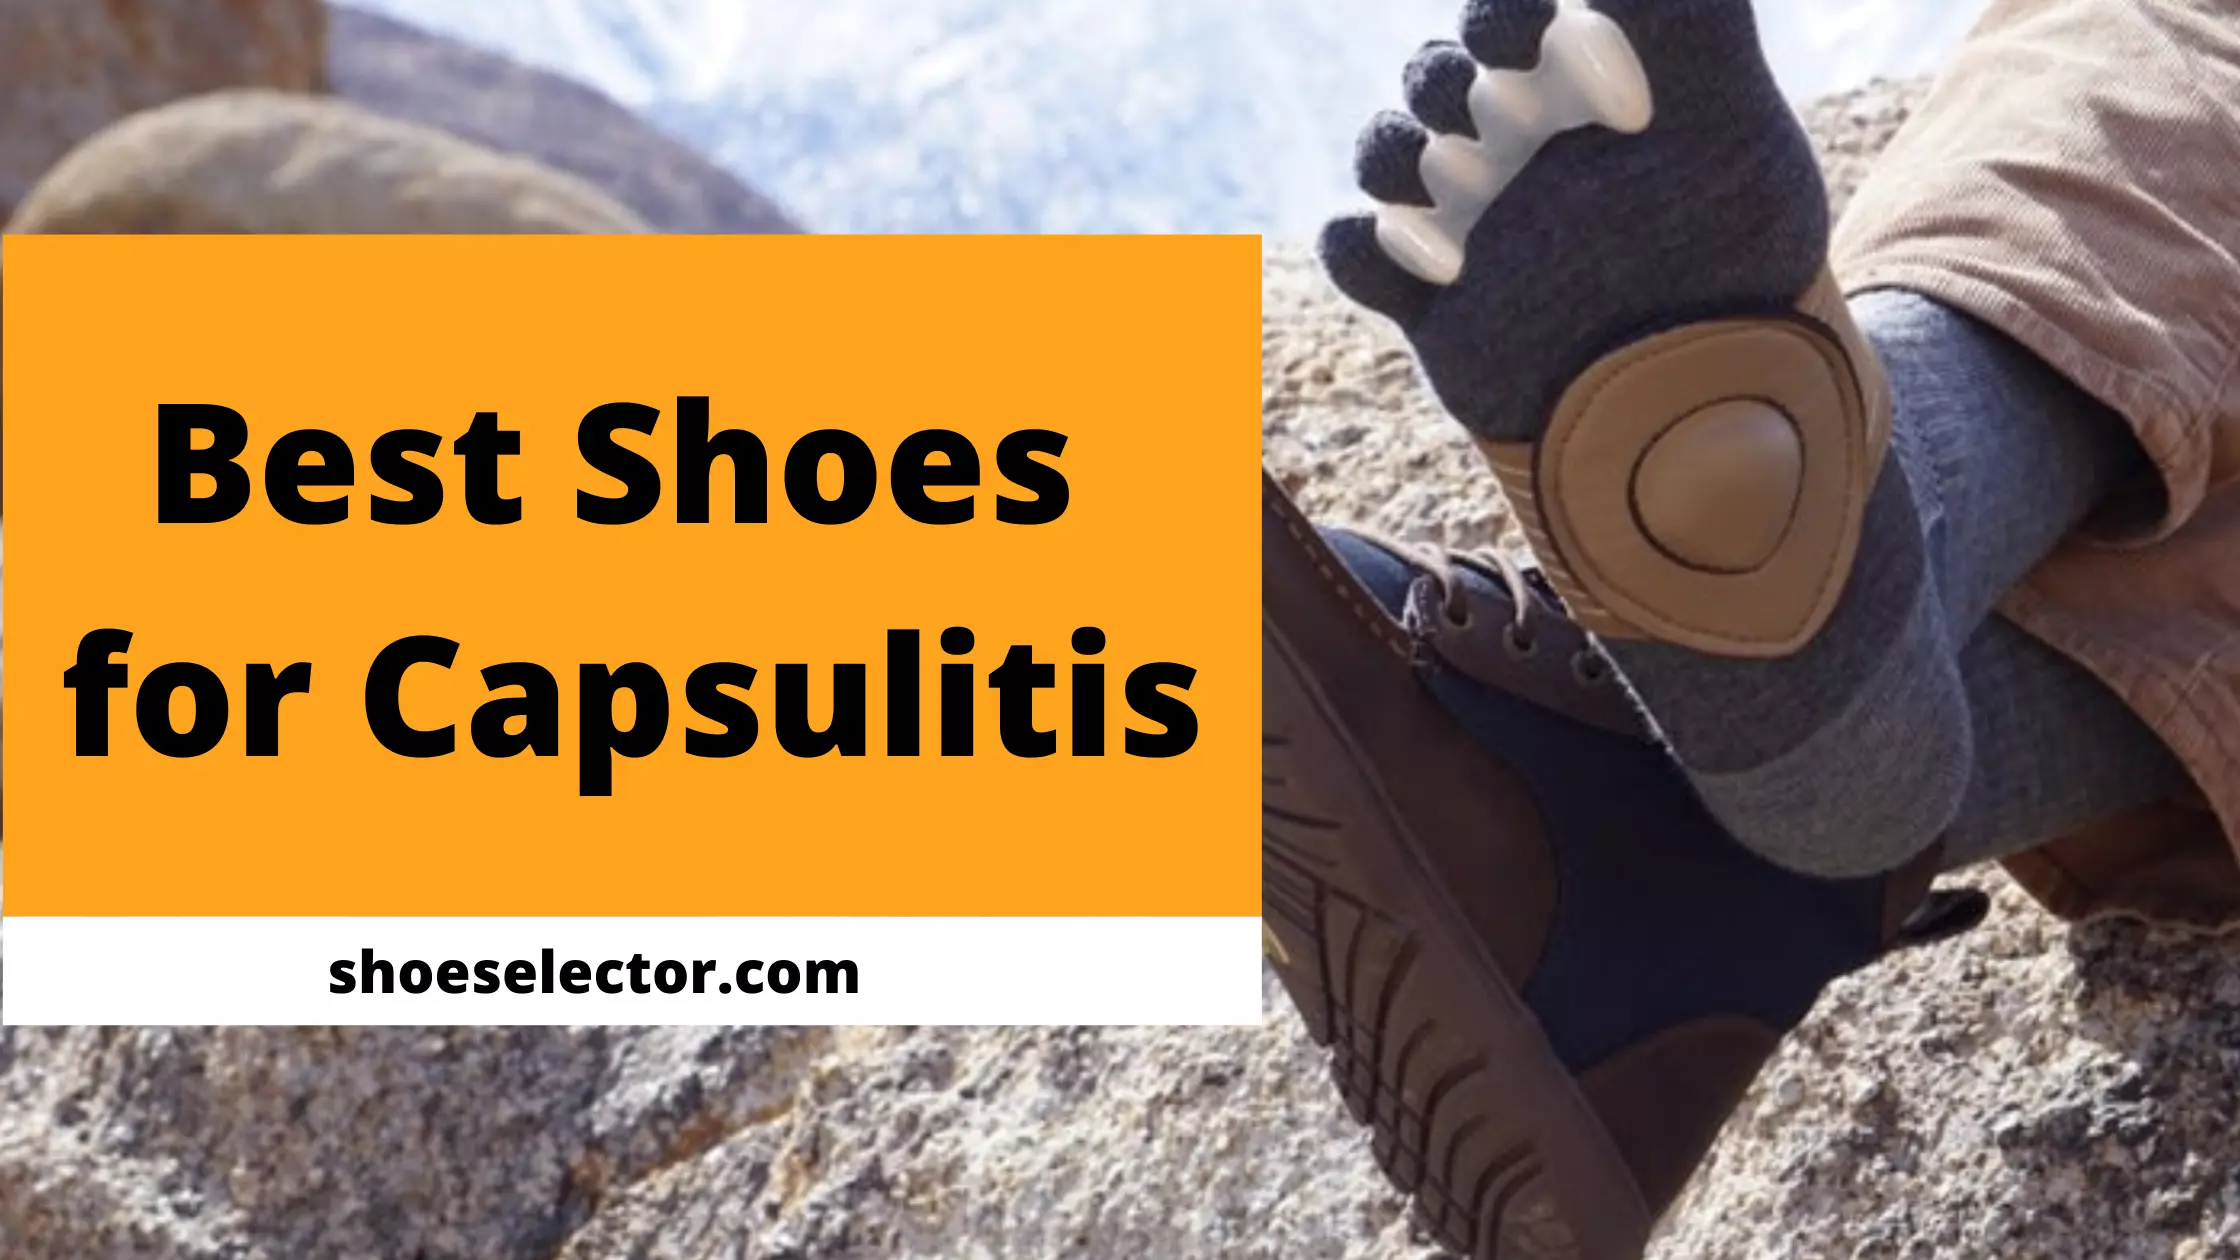 Best Shoes for Capsulitis - Best Recommended Products